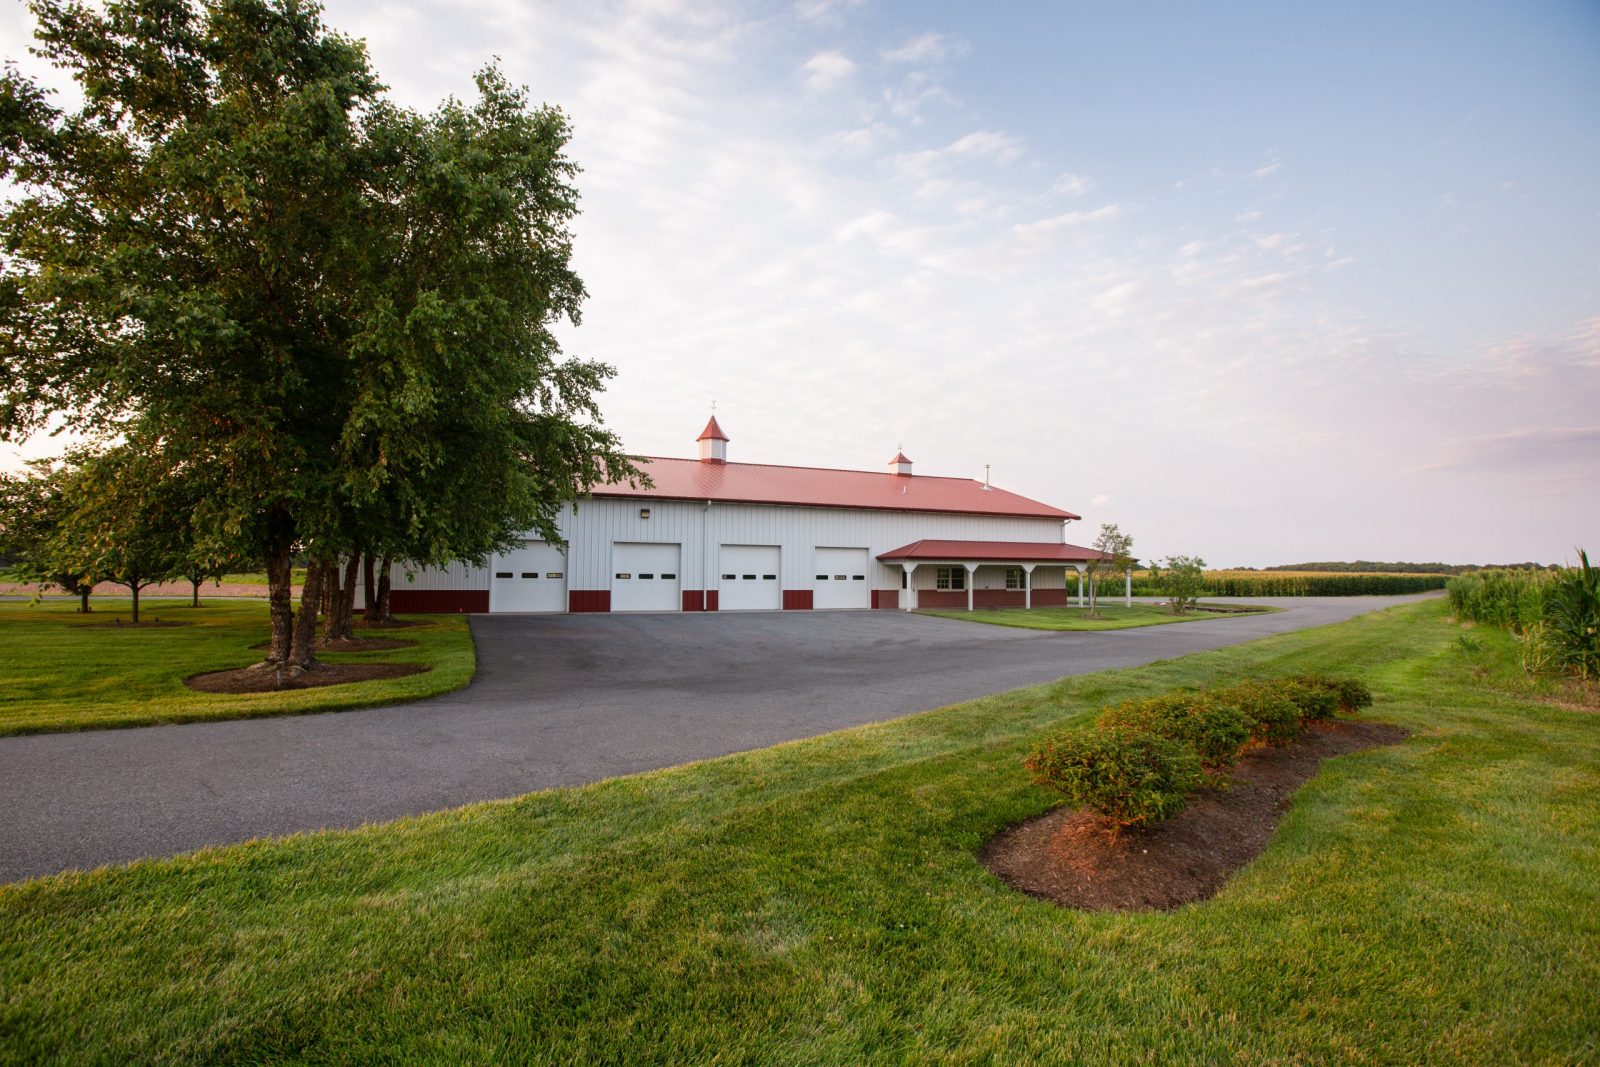 grass and bushes foreground, red roof barn background